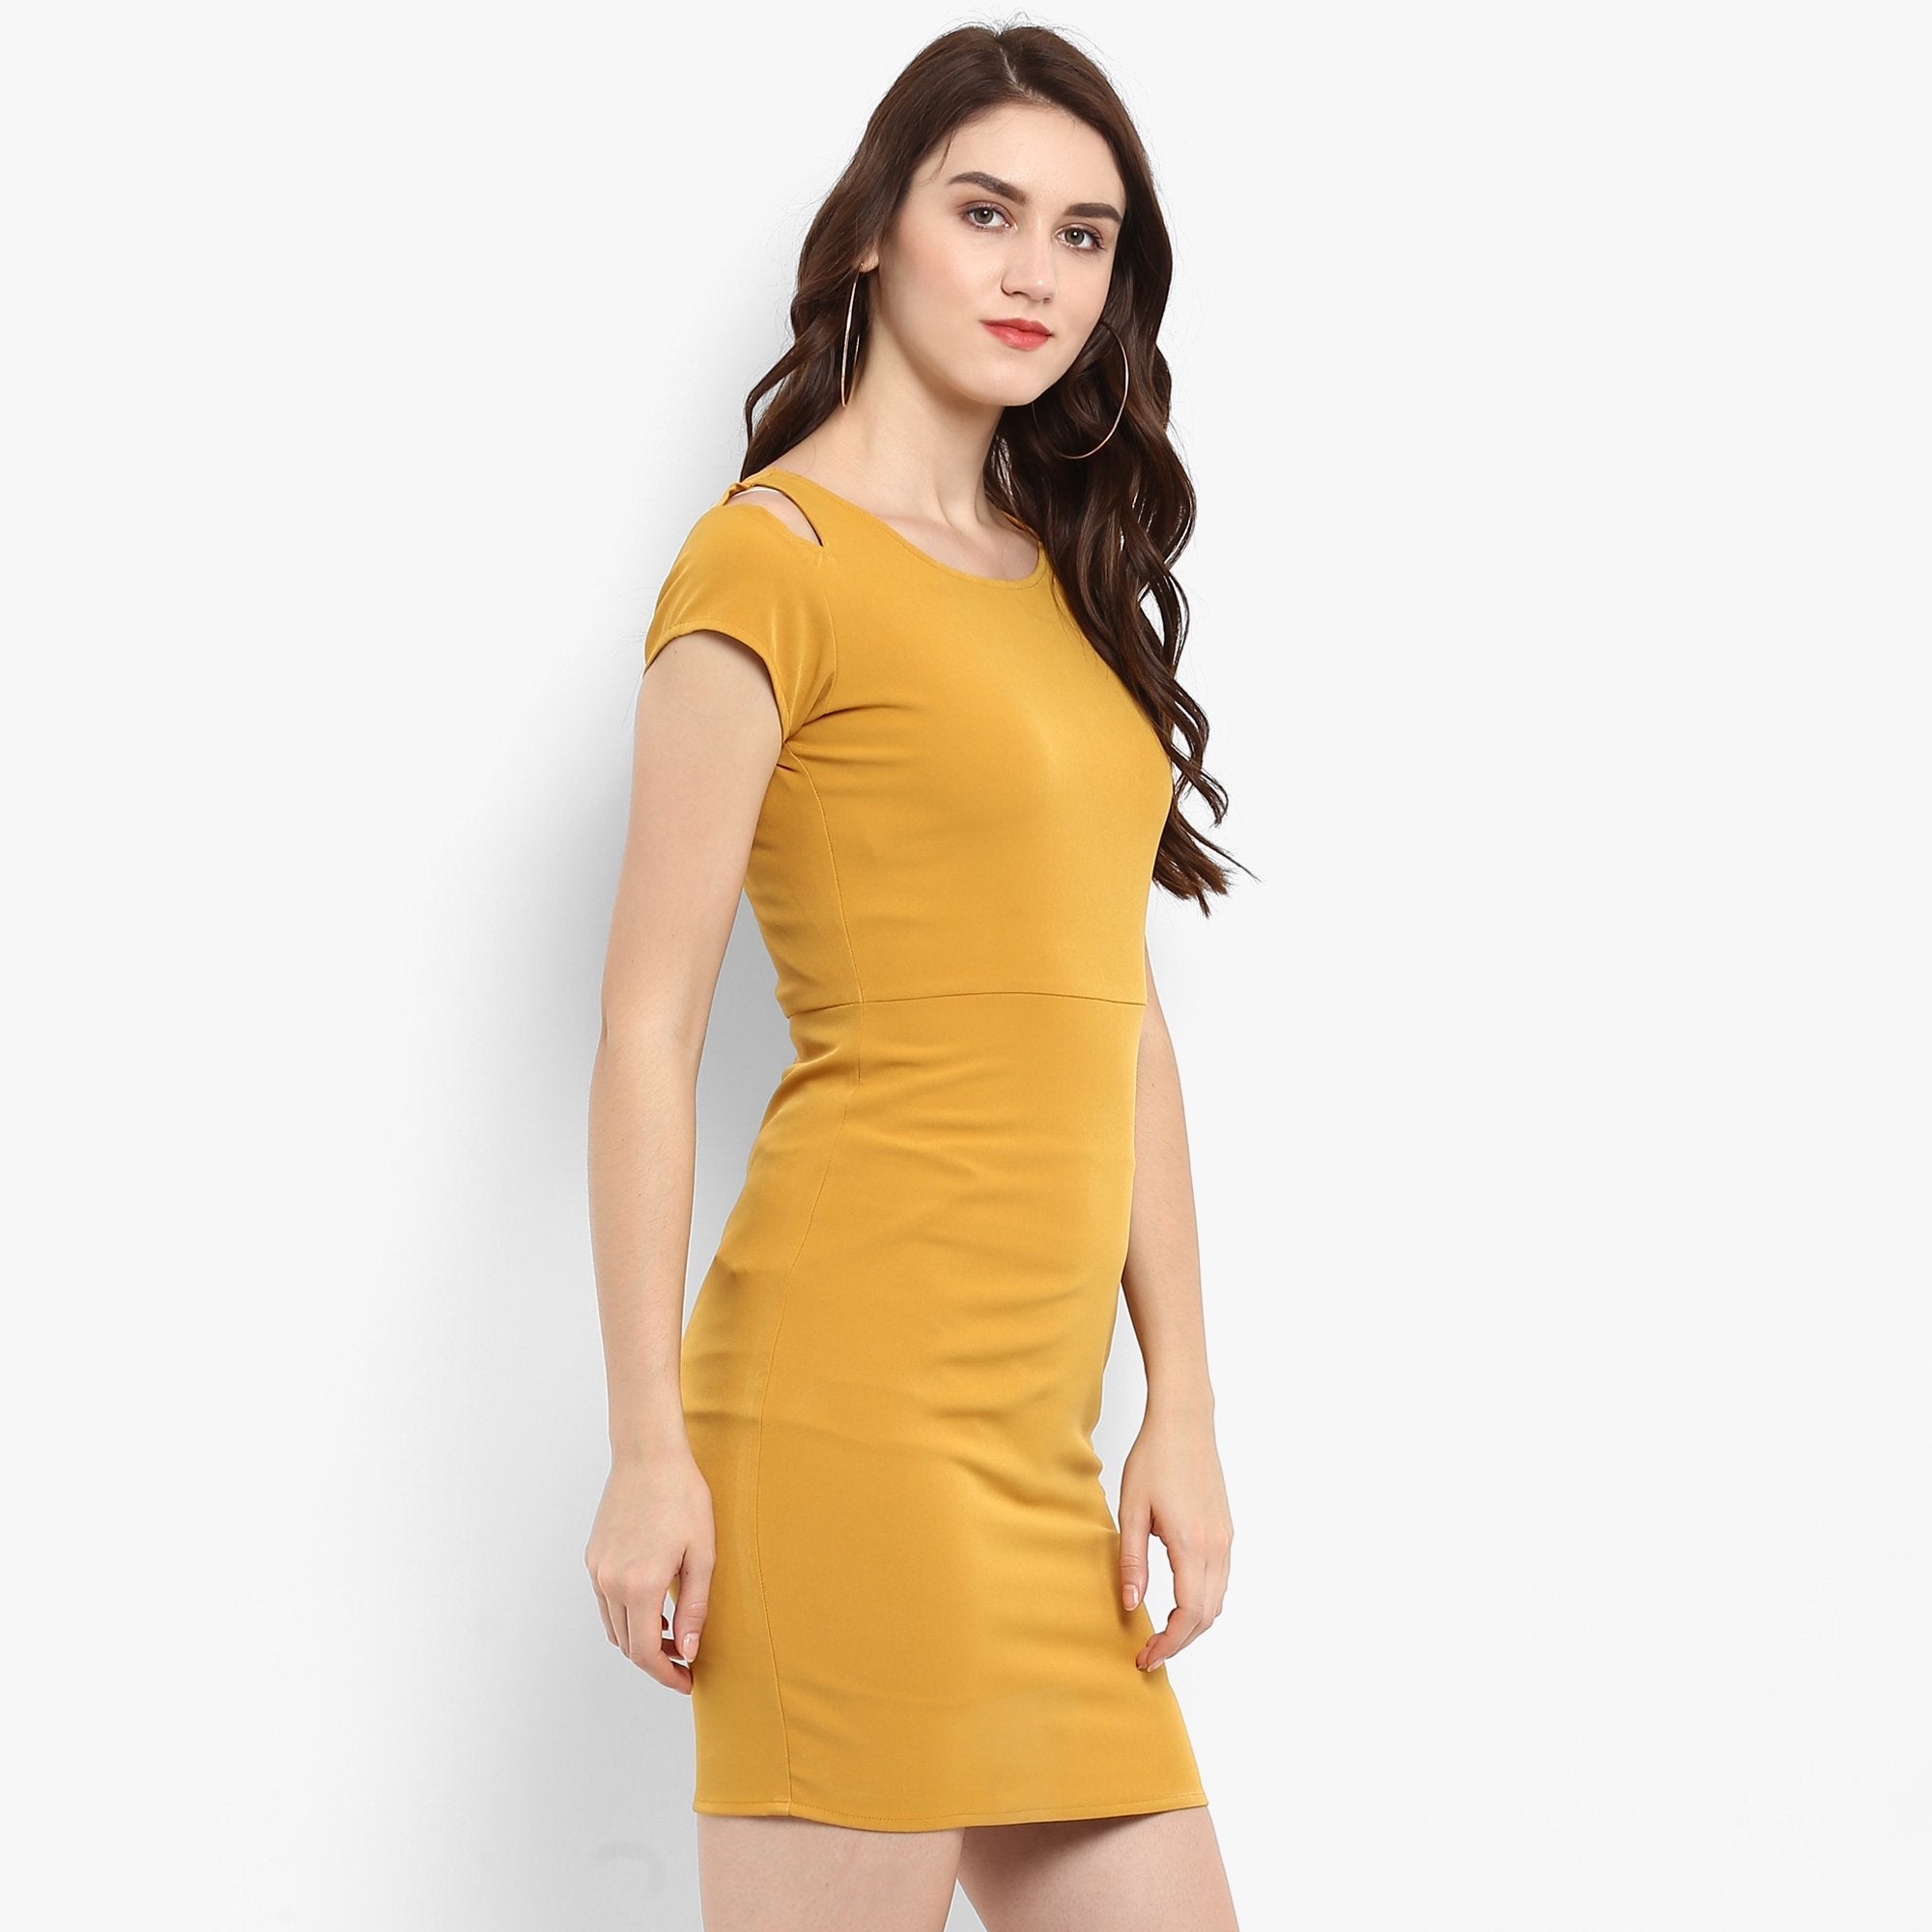 Women's Solid Fitted Dress With Cut At Shoulder - Pannkh